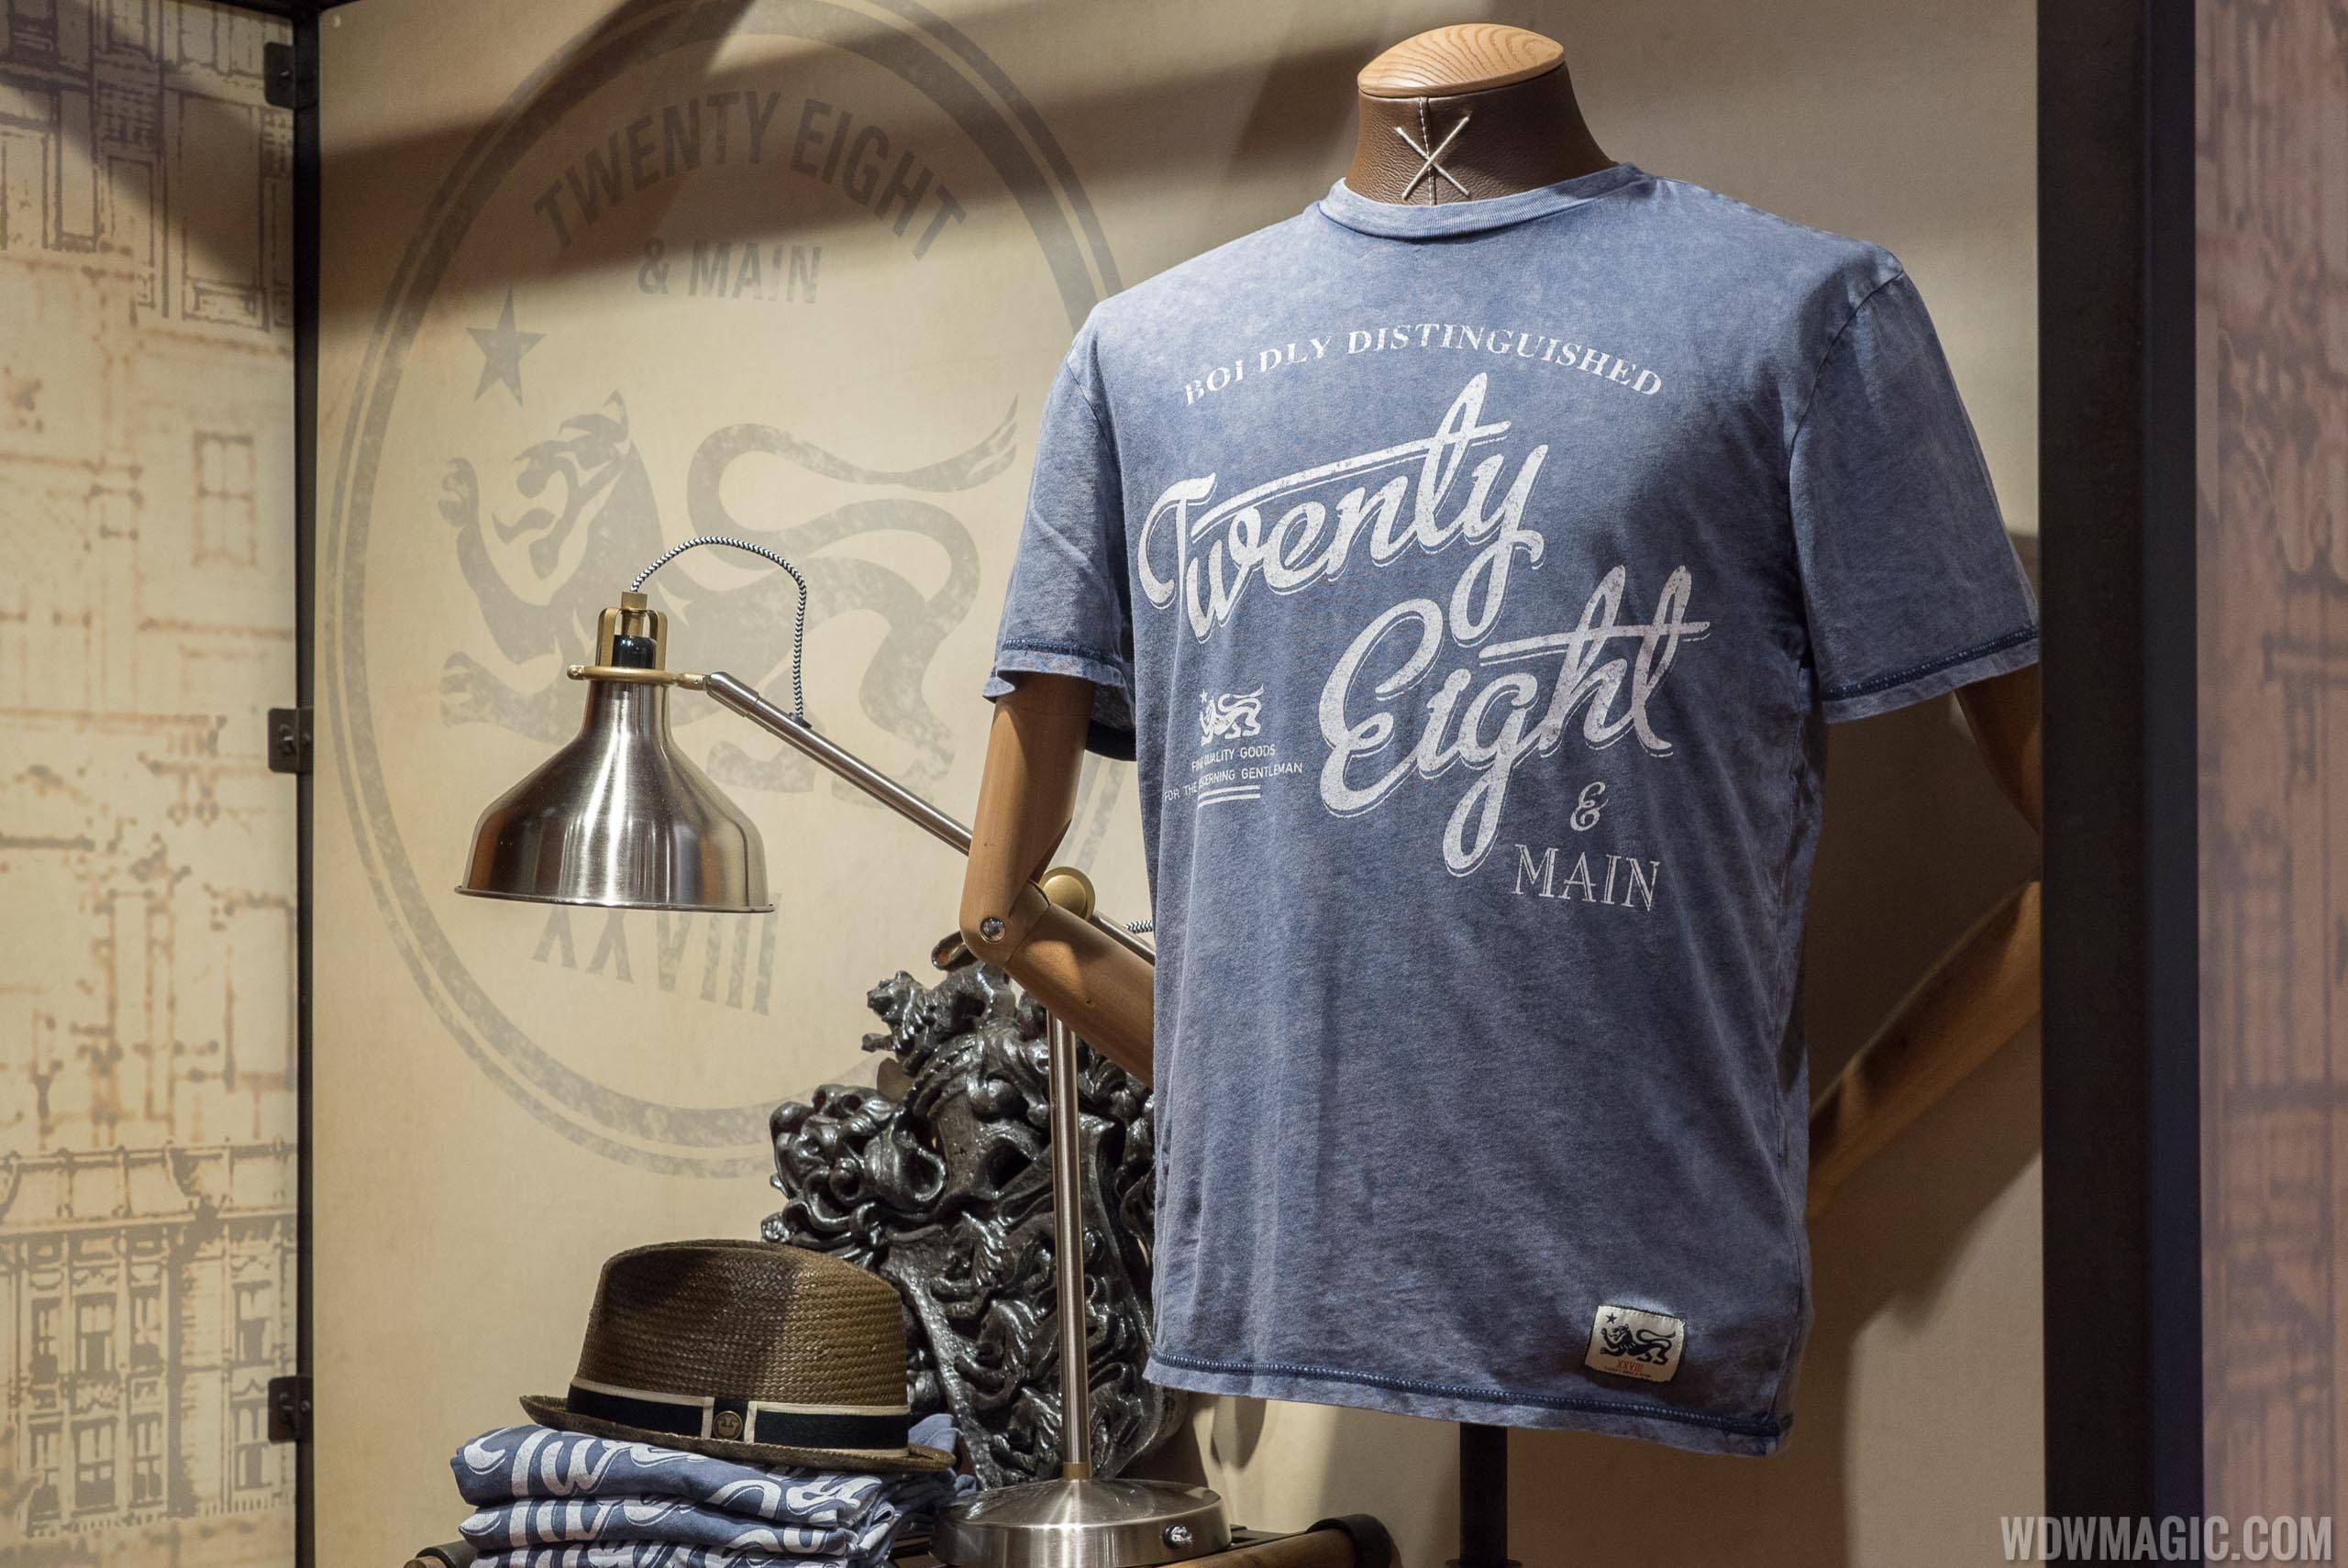 PHOTOS - Twenty Eight and Main now open at Disney Springs Marketplace Co-Op